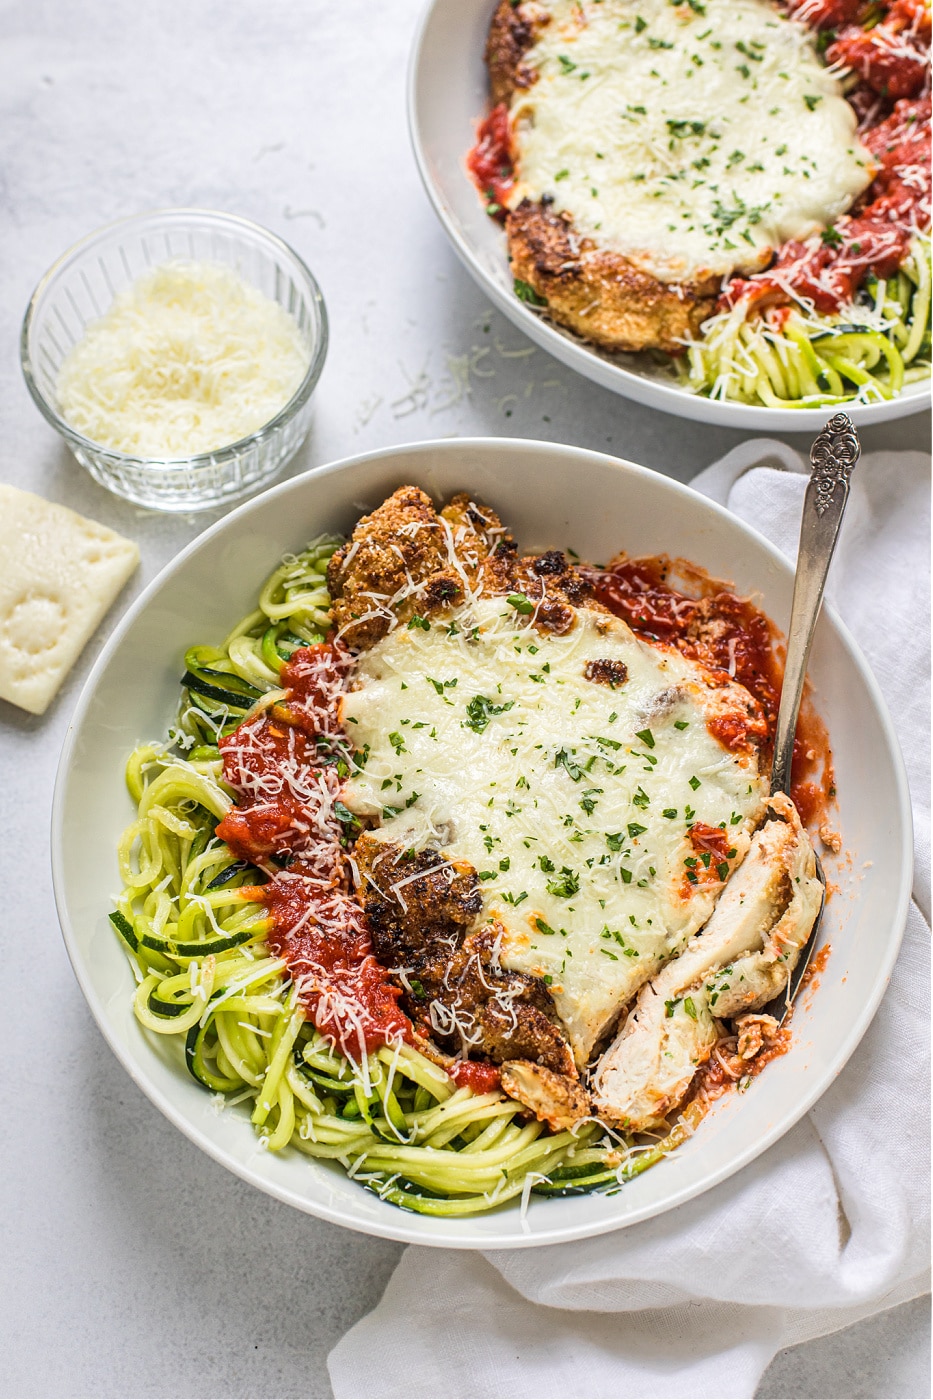 Grain-Free Chicken Parmesan with Zucchini Noodles